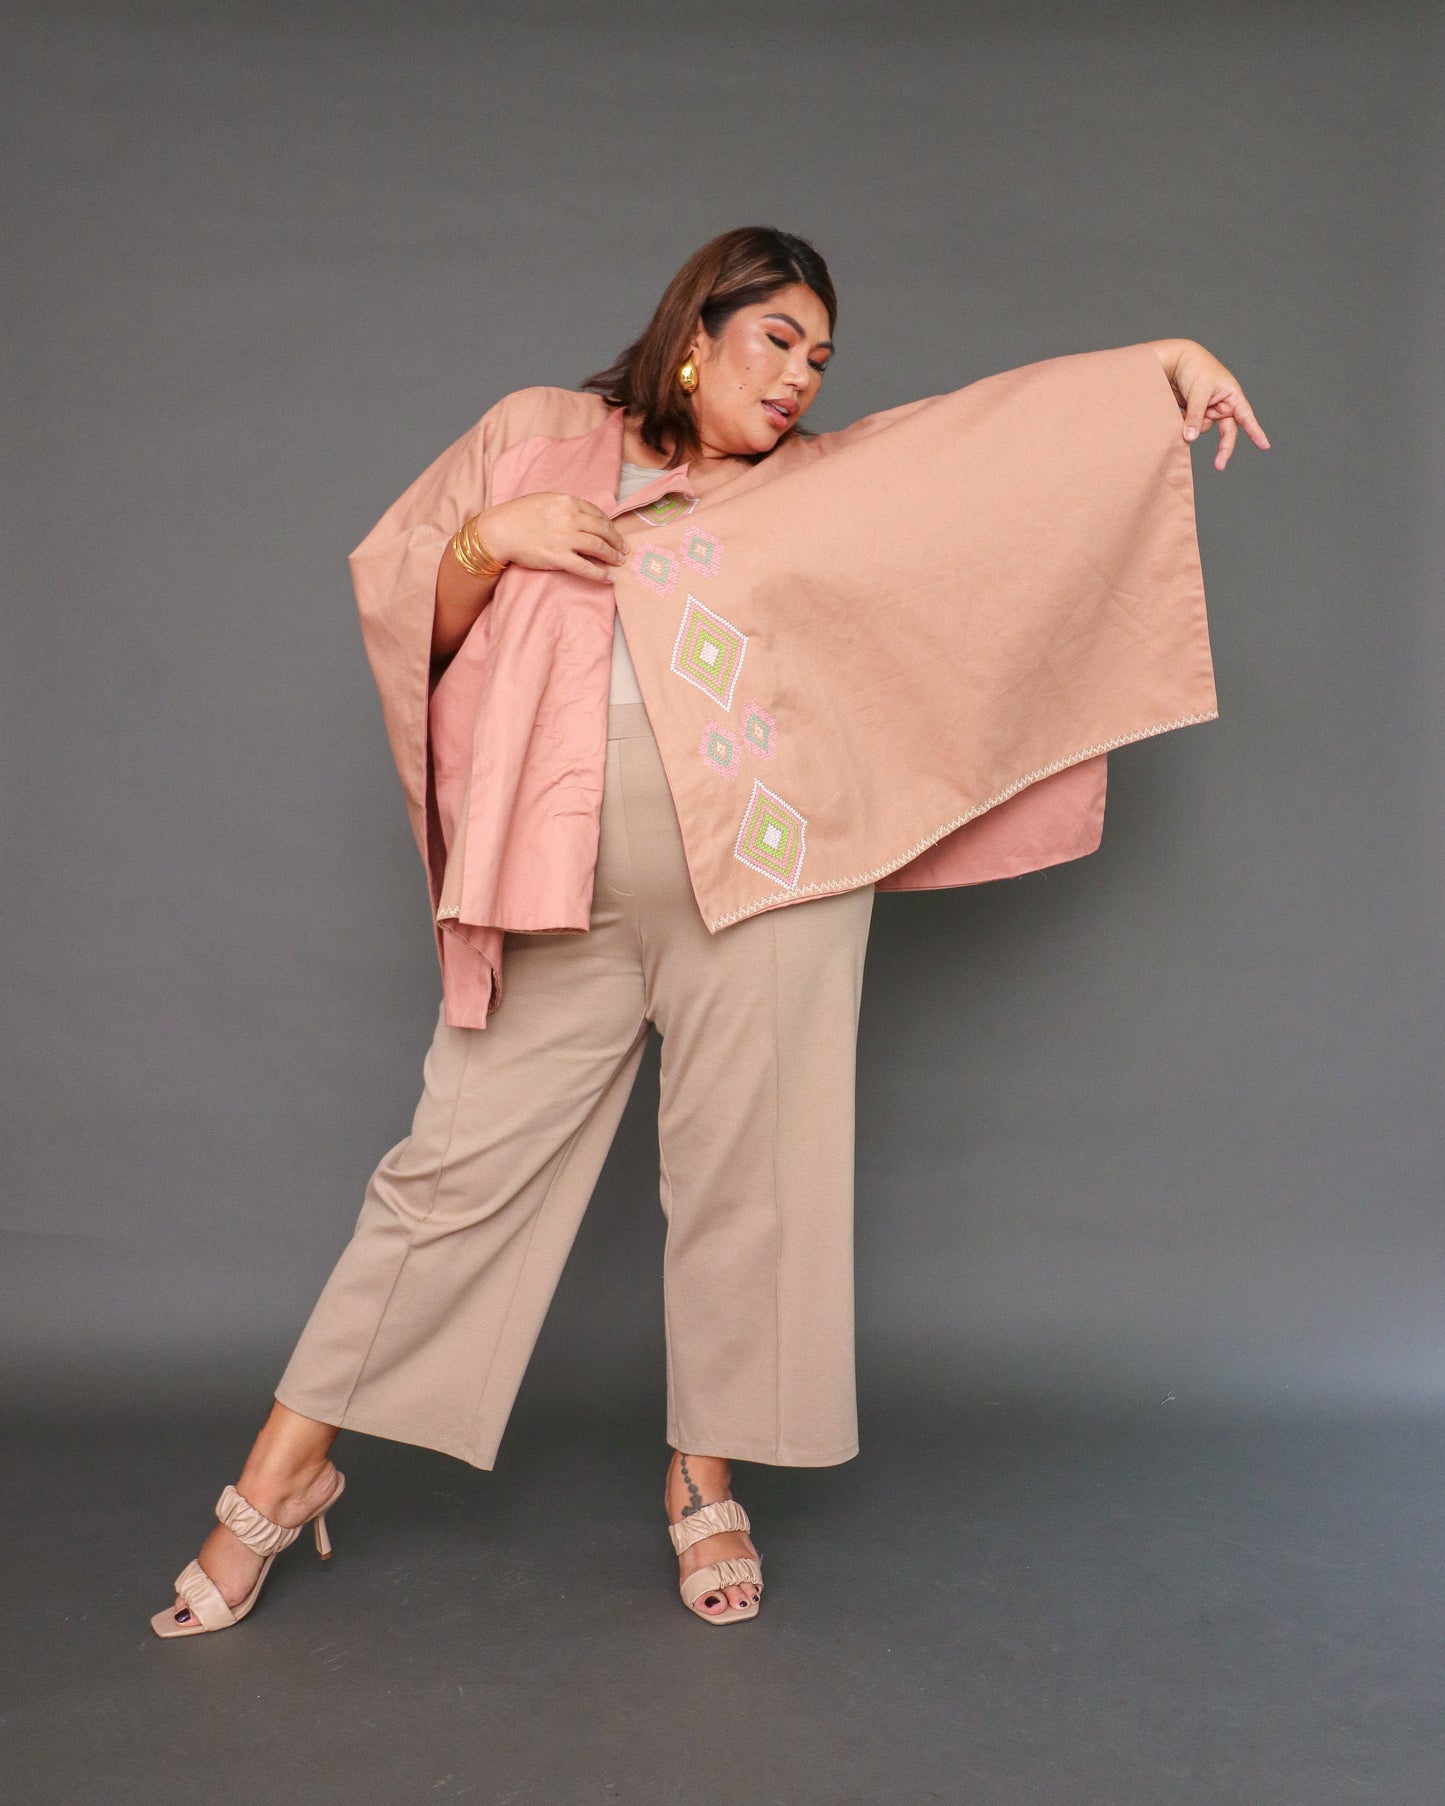 Balabal Kapa Versatile Cover Up Cape Poncho with Tboli Hand Embroidery in Muted Brown